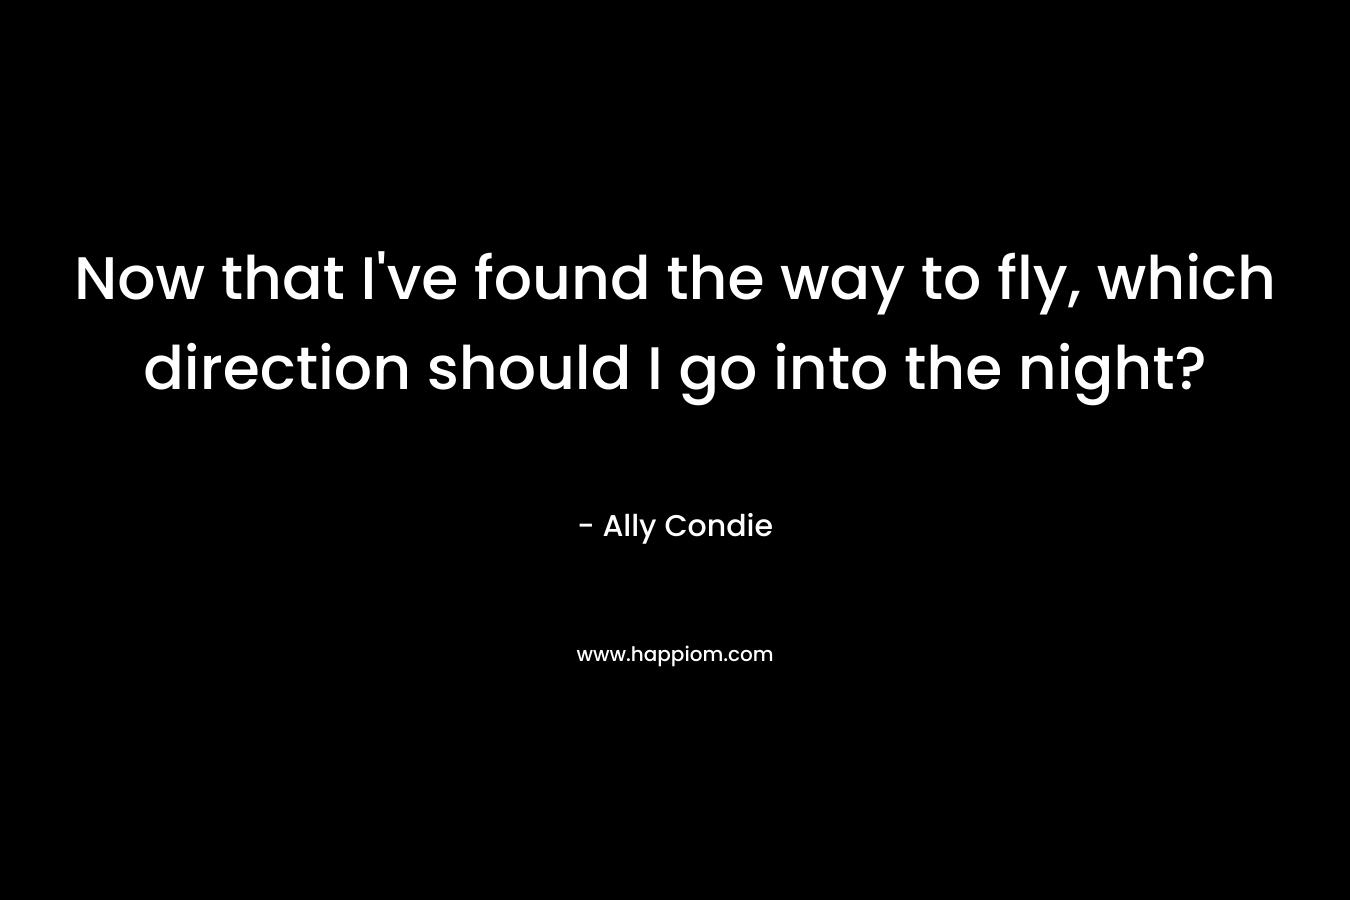 Now that I've found the way to fly, which direction should I go into the night?